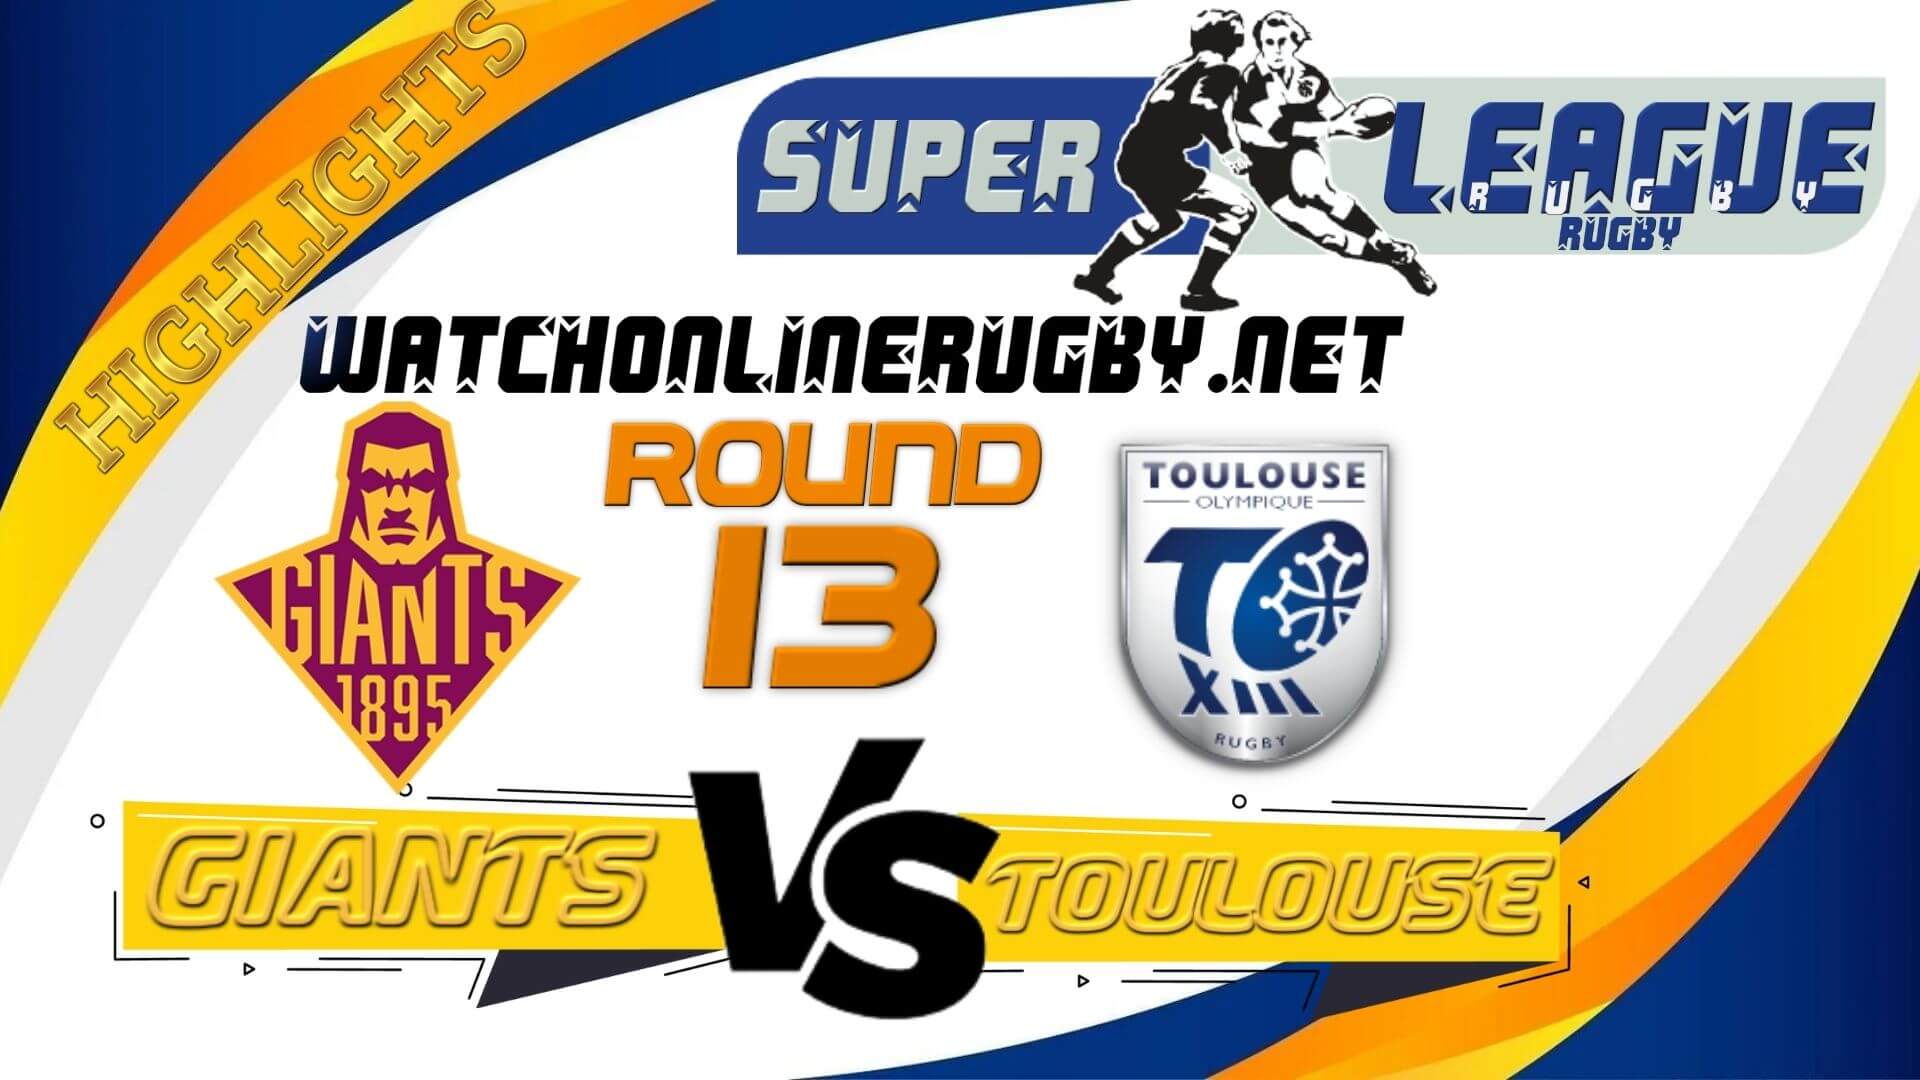 Huddersfield Giants Vs Toulouse Super League Rugby 2022 RD 13